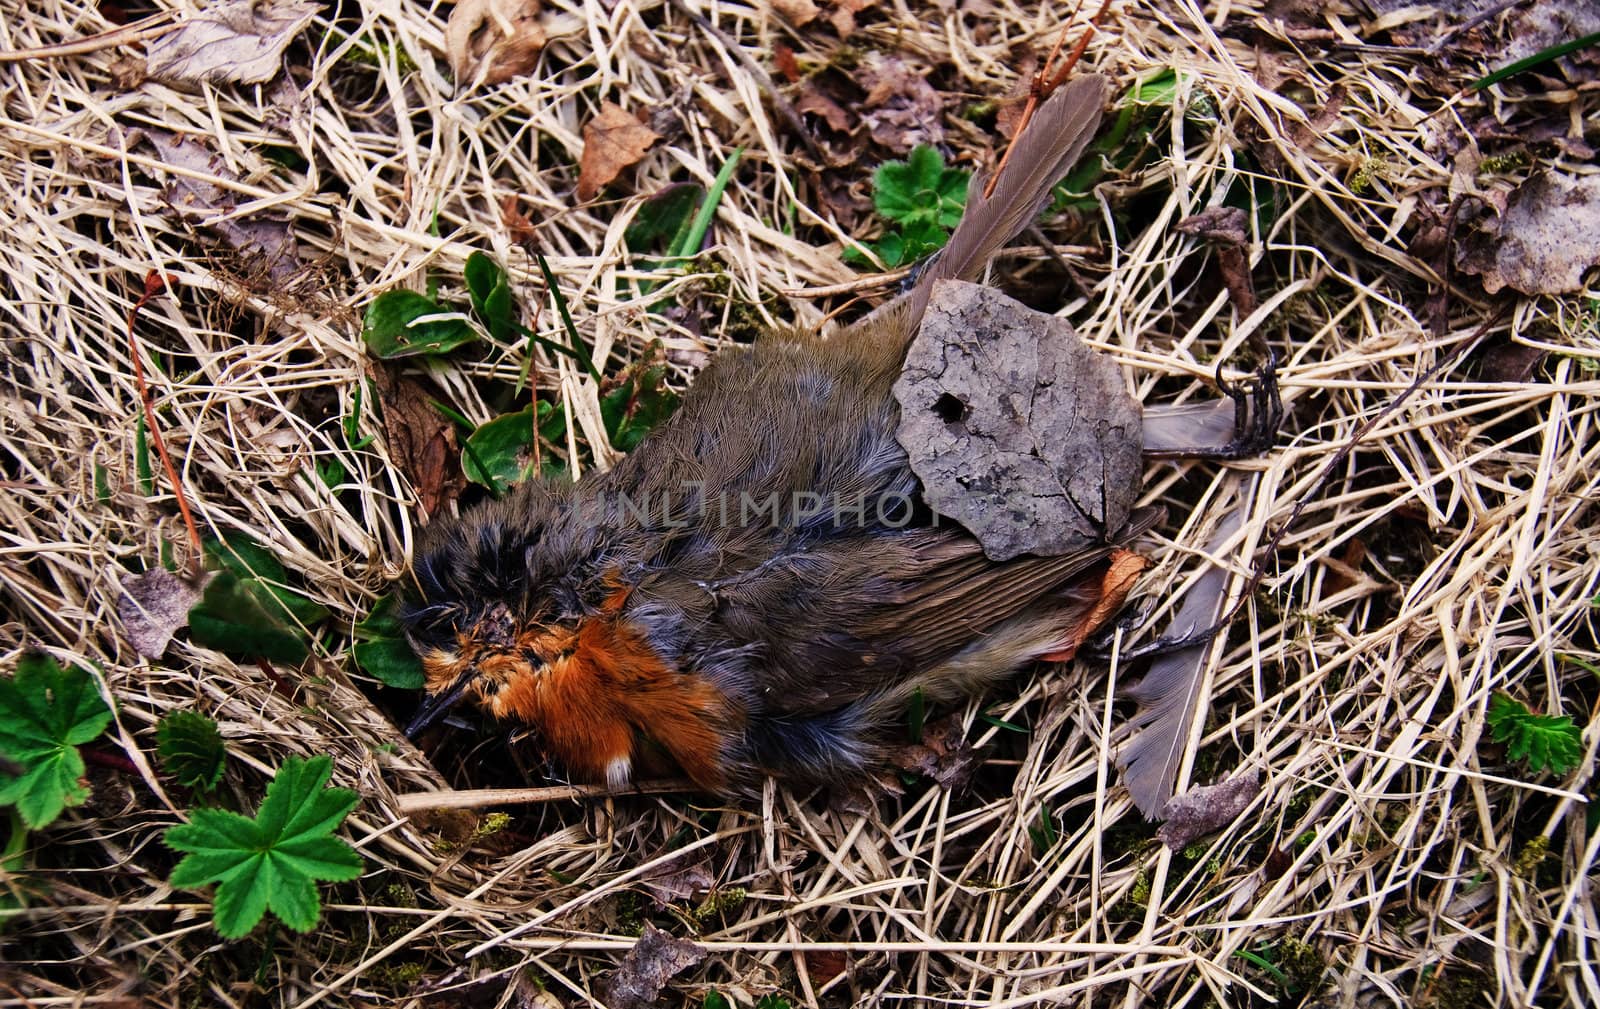 A dead robin located on the withered grass. New plants have begun to sprout
